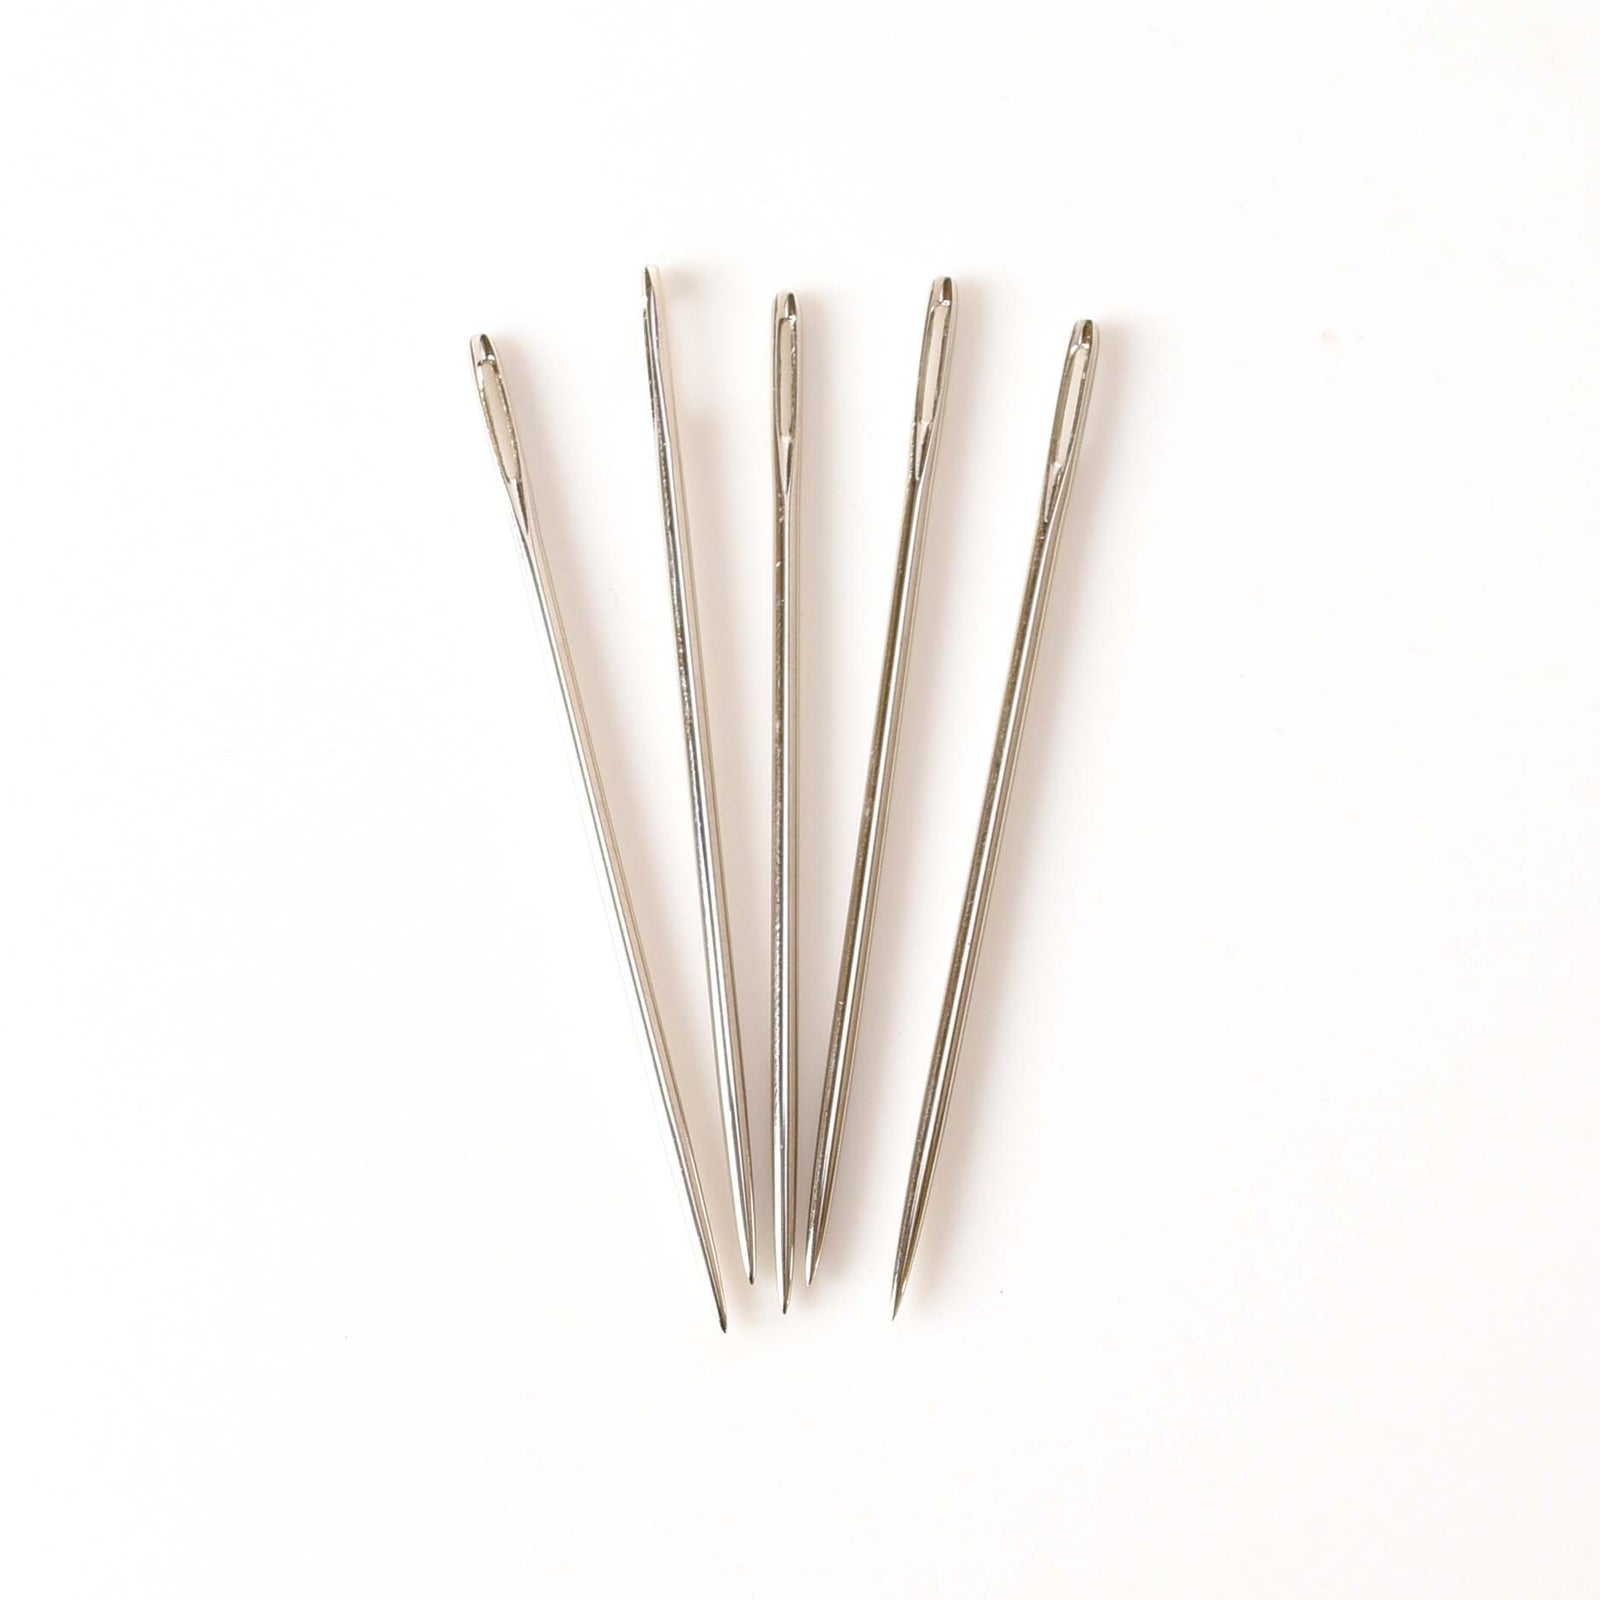 Tapestry Darning Needle for Crochet - 5 Sizes Set with Large Eye Blunt Needles for Knitting, Crafting Projects - 25 Pieces - Size 16, 18, 20, 22, 24